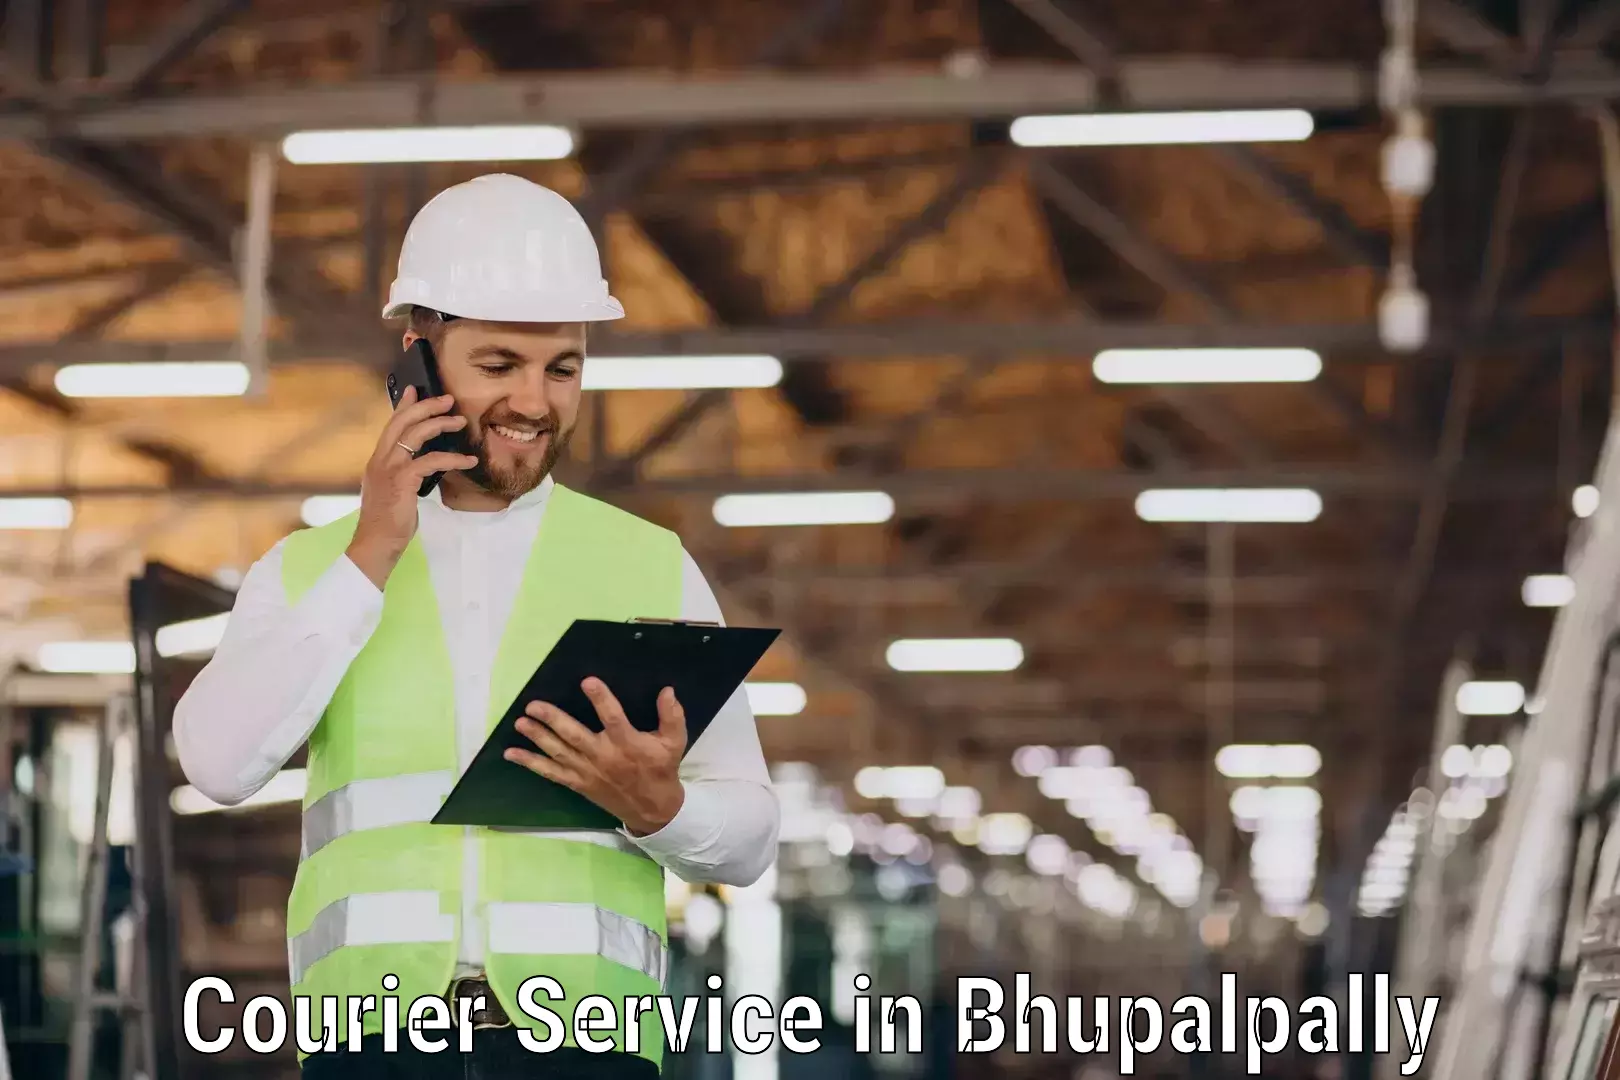 Automated parcel services in Bhupalpally